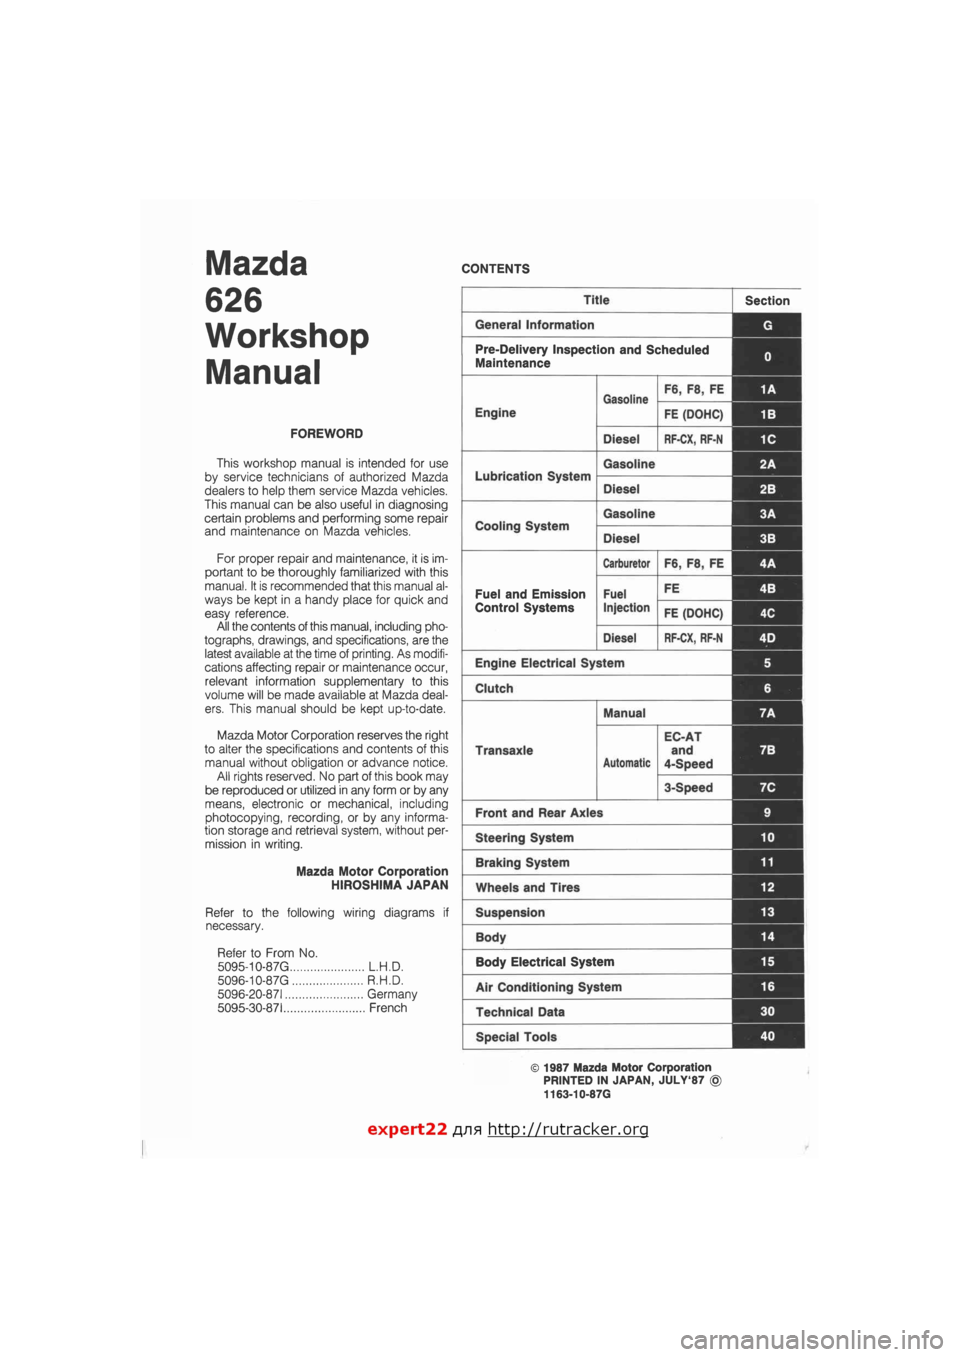 MAZDA 626 1987  Workshop Manual 
Mazda 
626 
Workshop 
Manual 
FOREWORD 
This workshop manual is intended for use 
by service technicians of authorized Mazda 
dealers to help them service Mazda vehicles. 
This manual can be also use